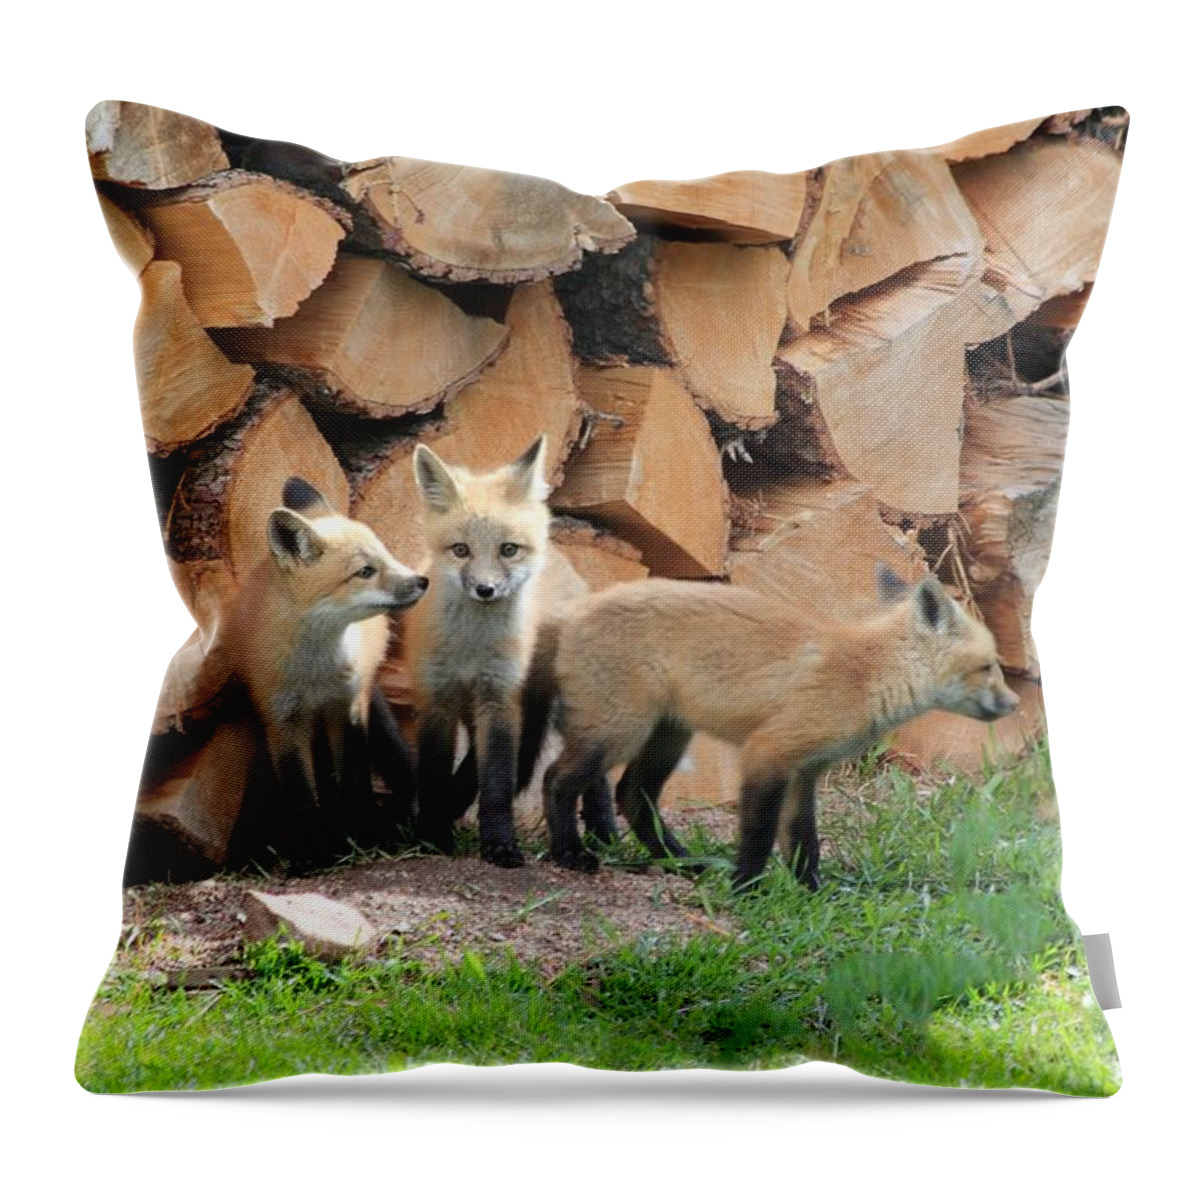 Fox Throw Pillow featuring the photograph Fox Kits by Shane Bechler